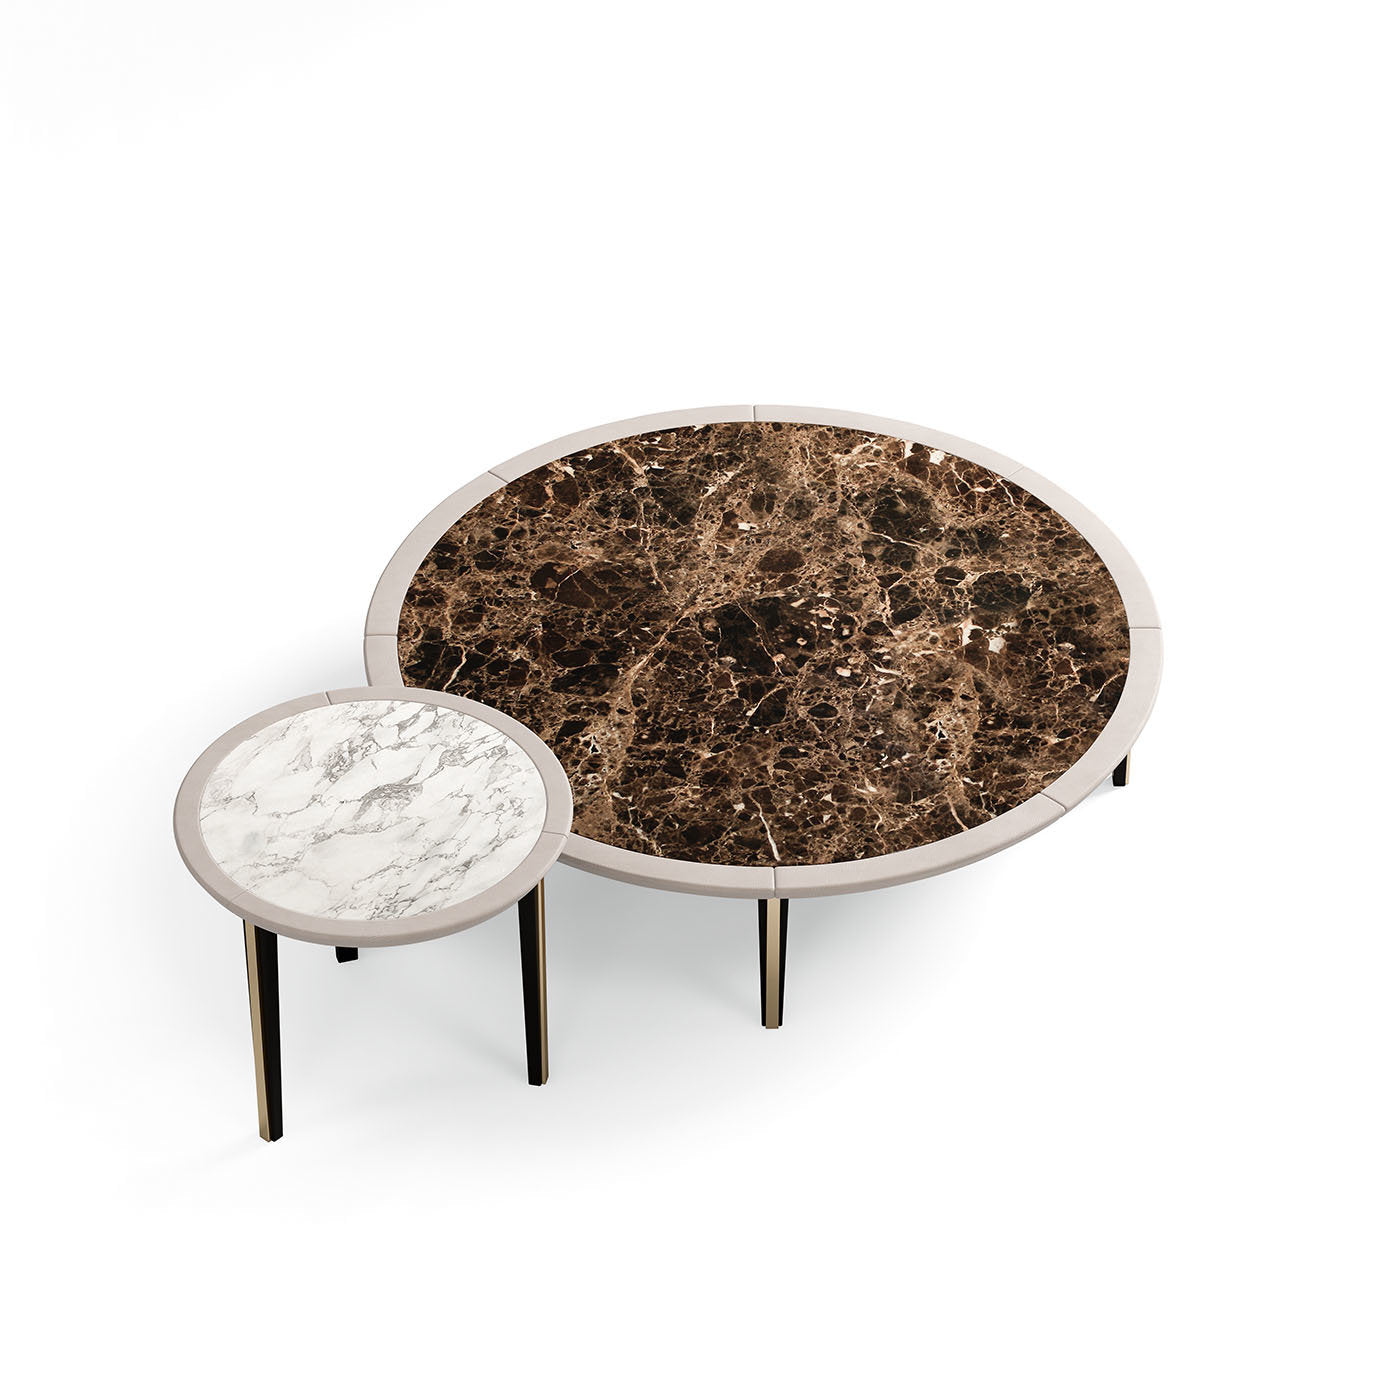 Set of Elan Side Table and Circle Coffee Table - Alternative view 1